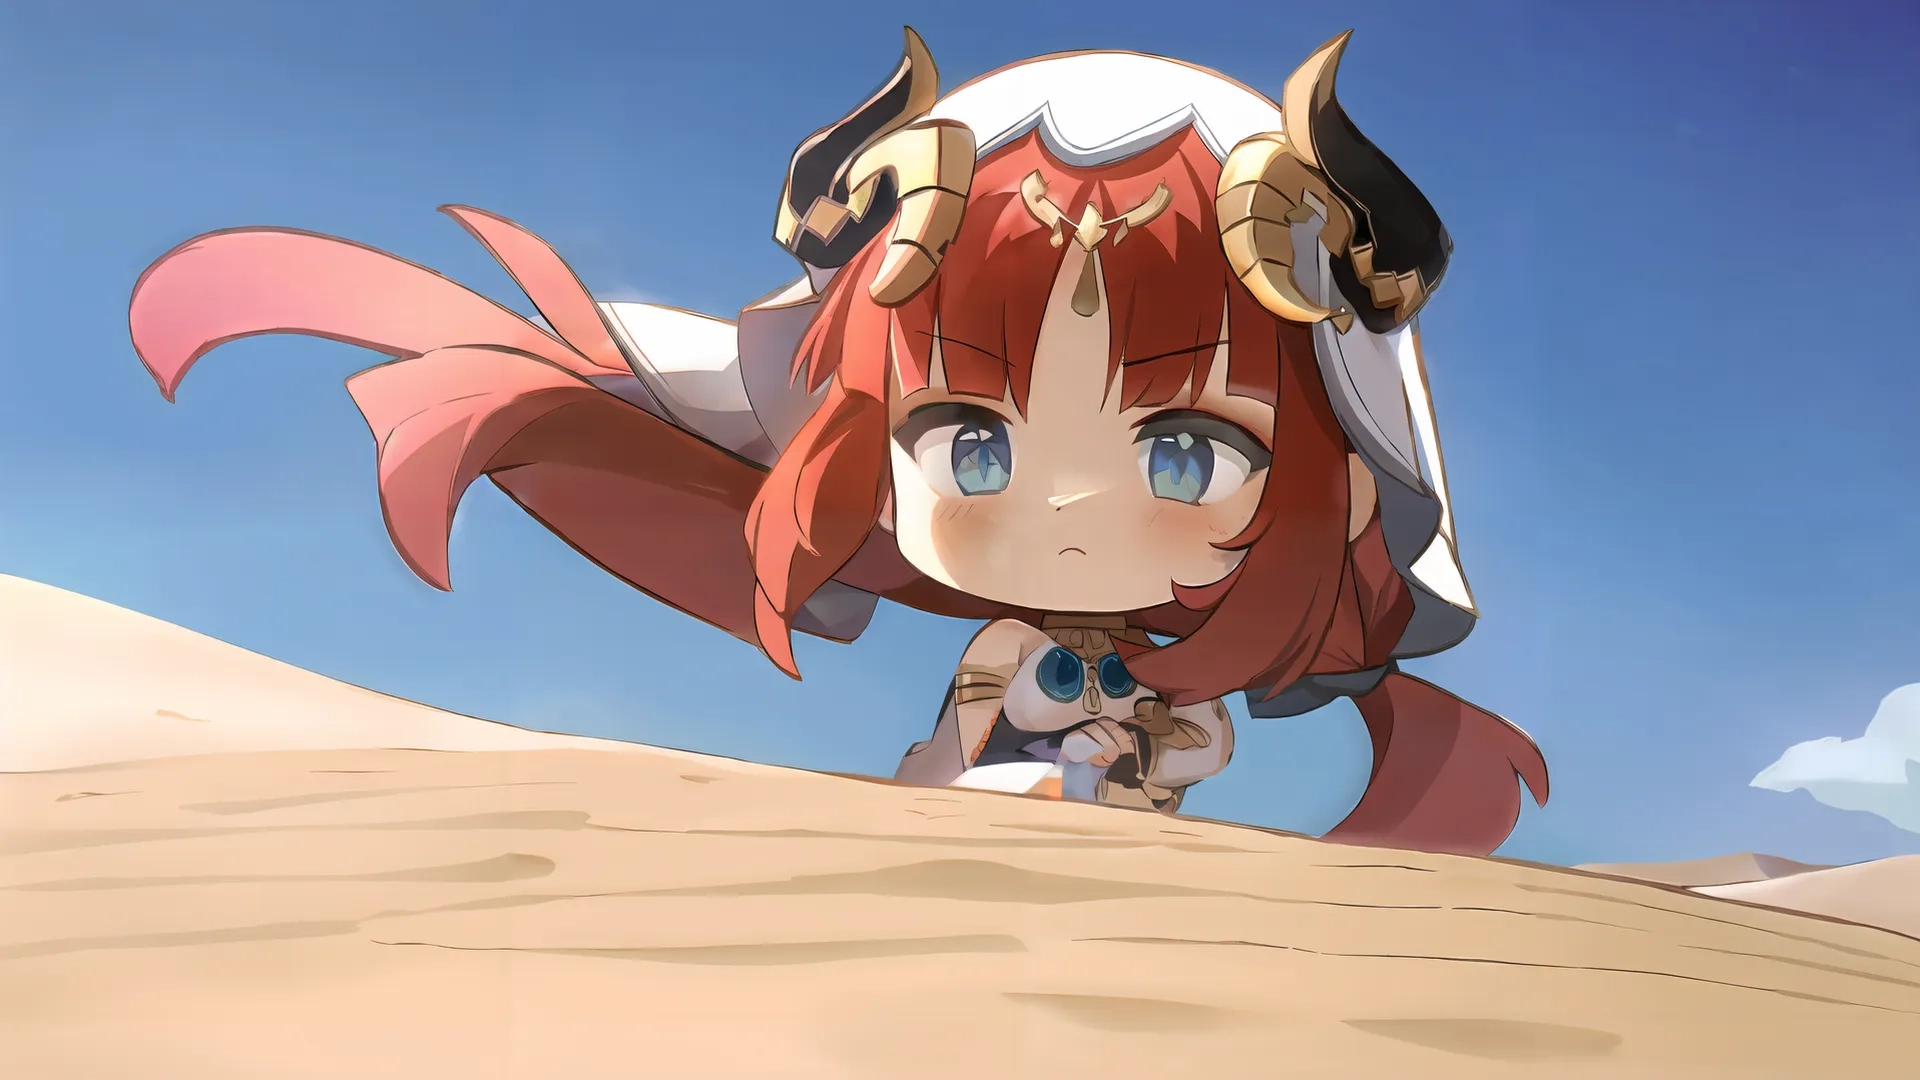 a cartoon girl is wearing a red outfit and holding a microphone, wearing a helmet on her head and big horns, at the bottom of the desert
